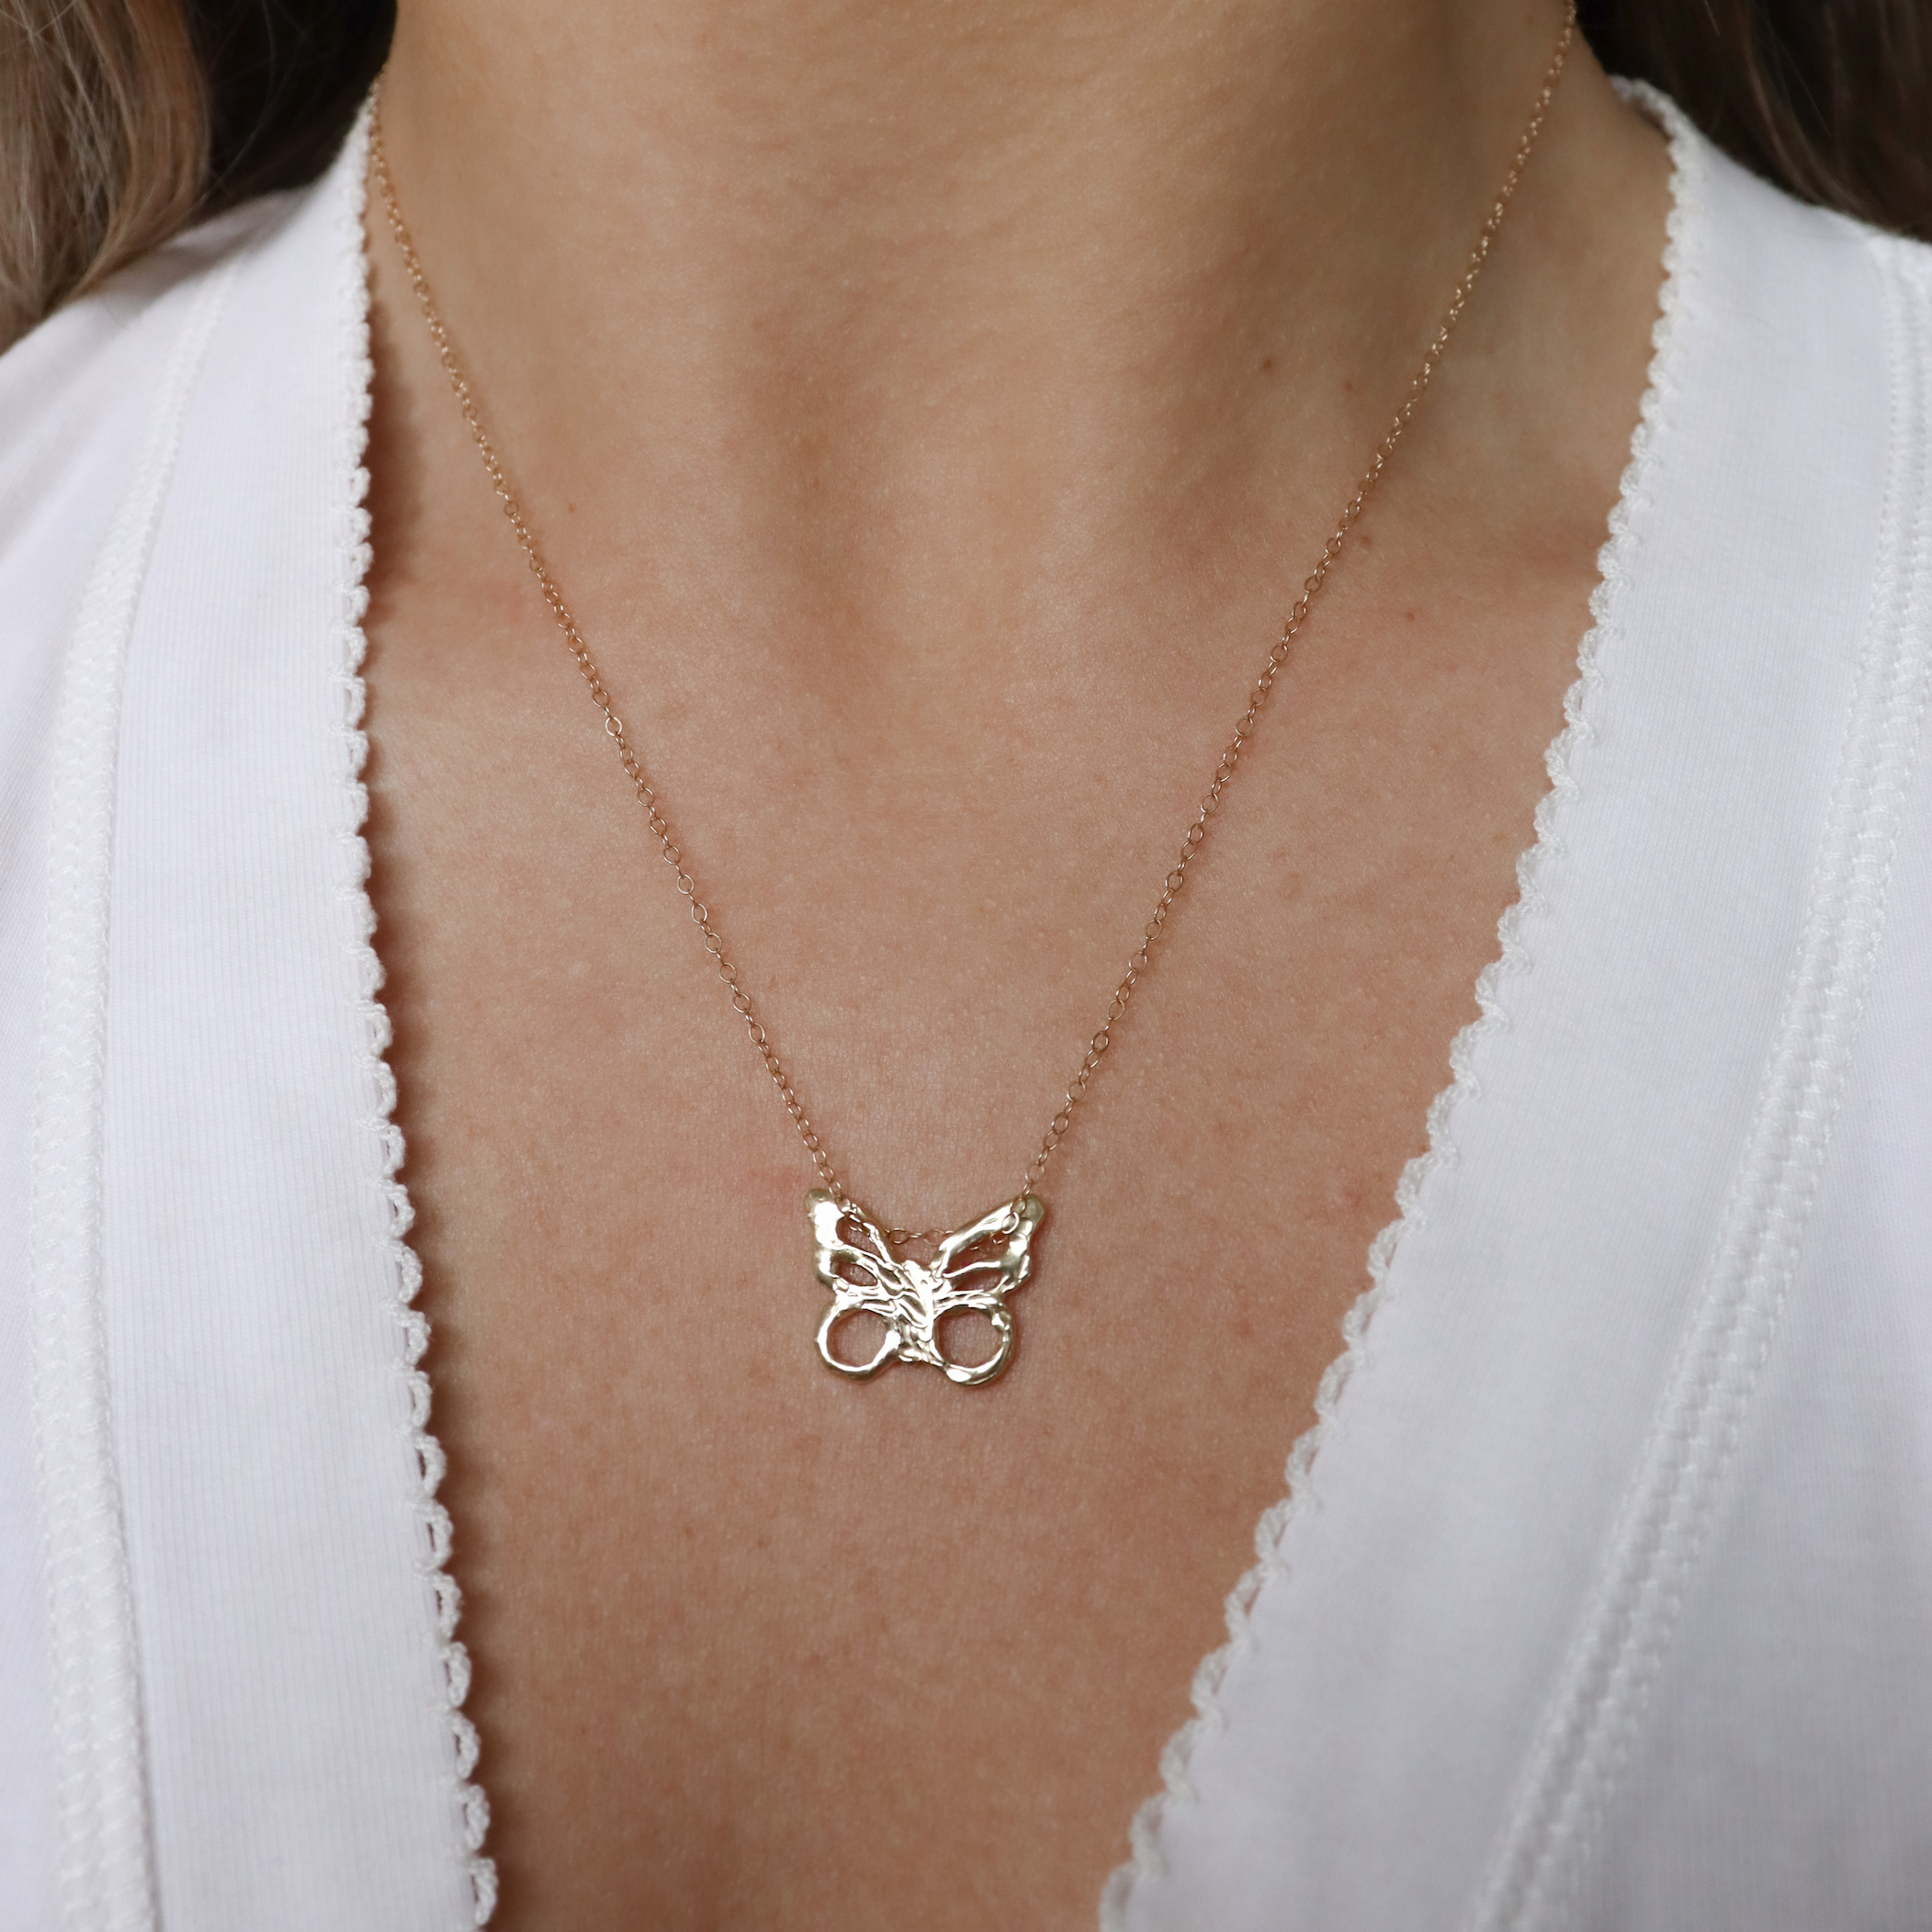 Model wears the One of a kind butterfly charm necklace made out of 14k yellow gold